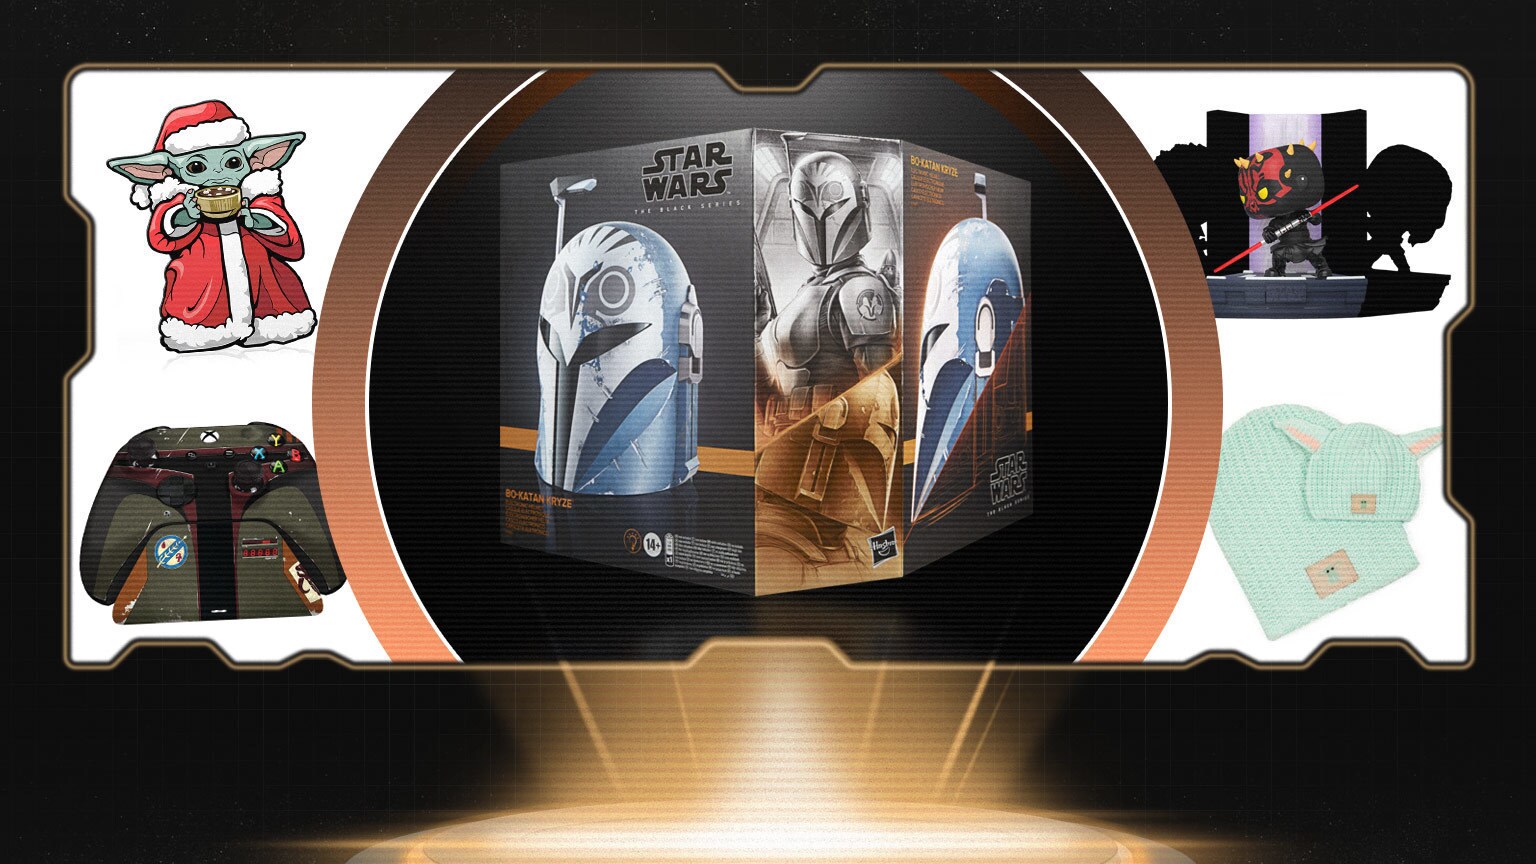 Bring Home the Bounty: New Bo-Katan Helmet Revealed and More!